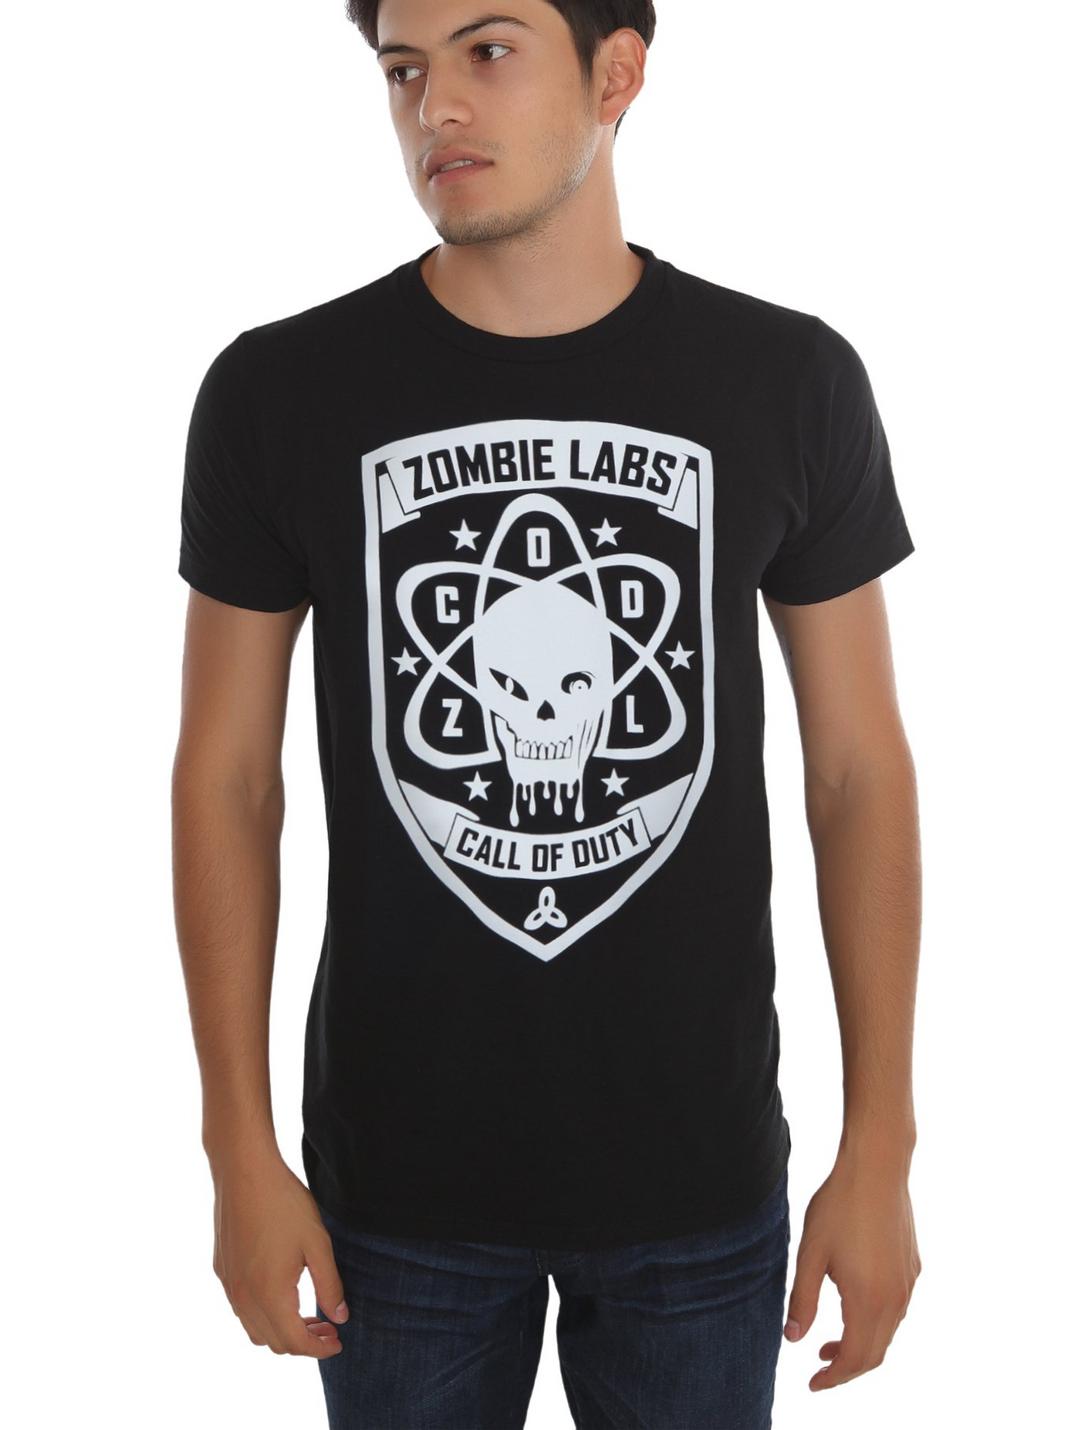 Call Of Duty: Black Ops III Zombie Labs T-Shirt, BLACK, hi-res